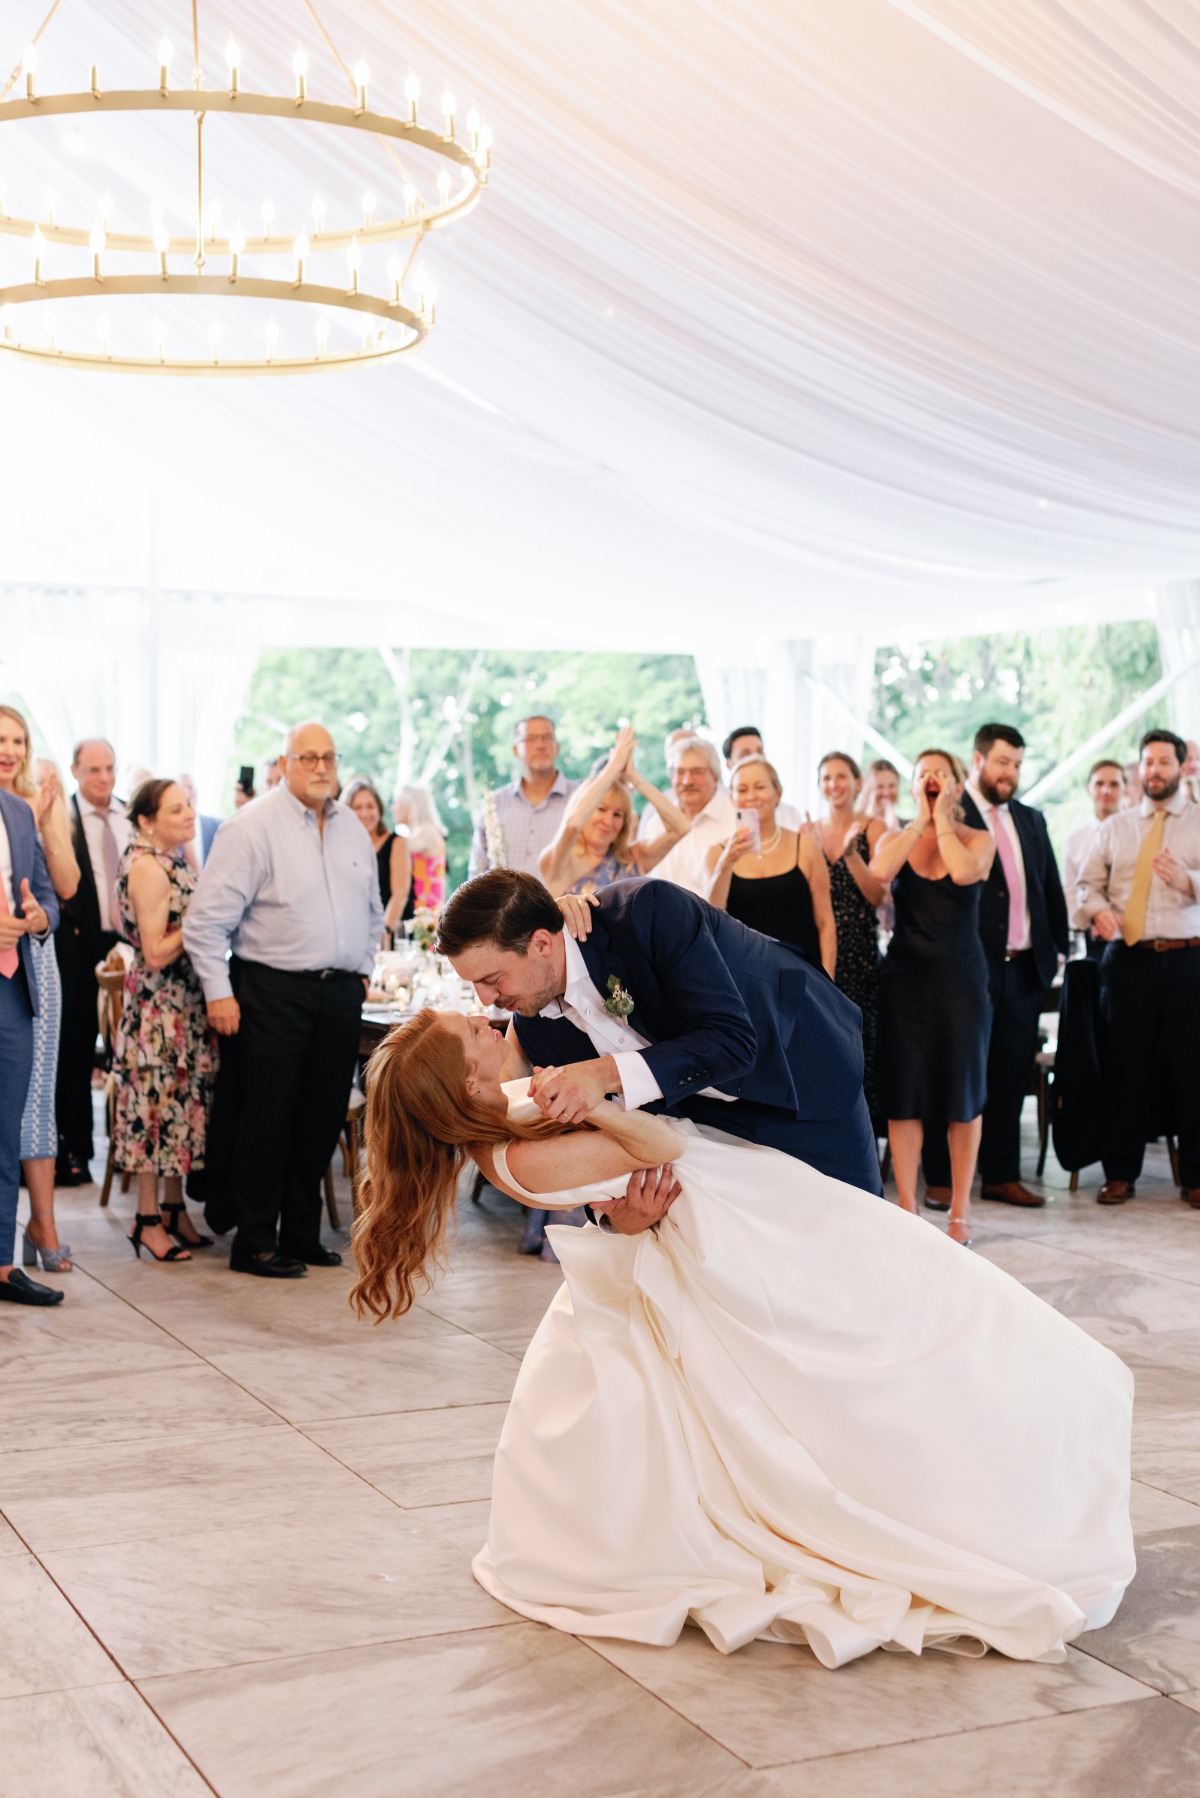 Bride and groom first dance at tented reception 